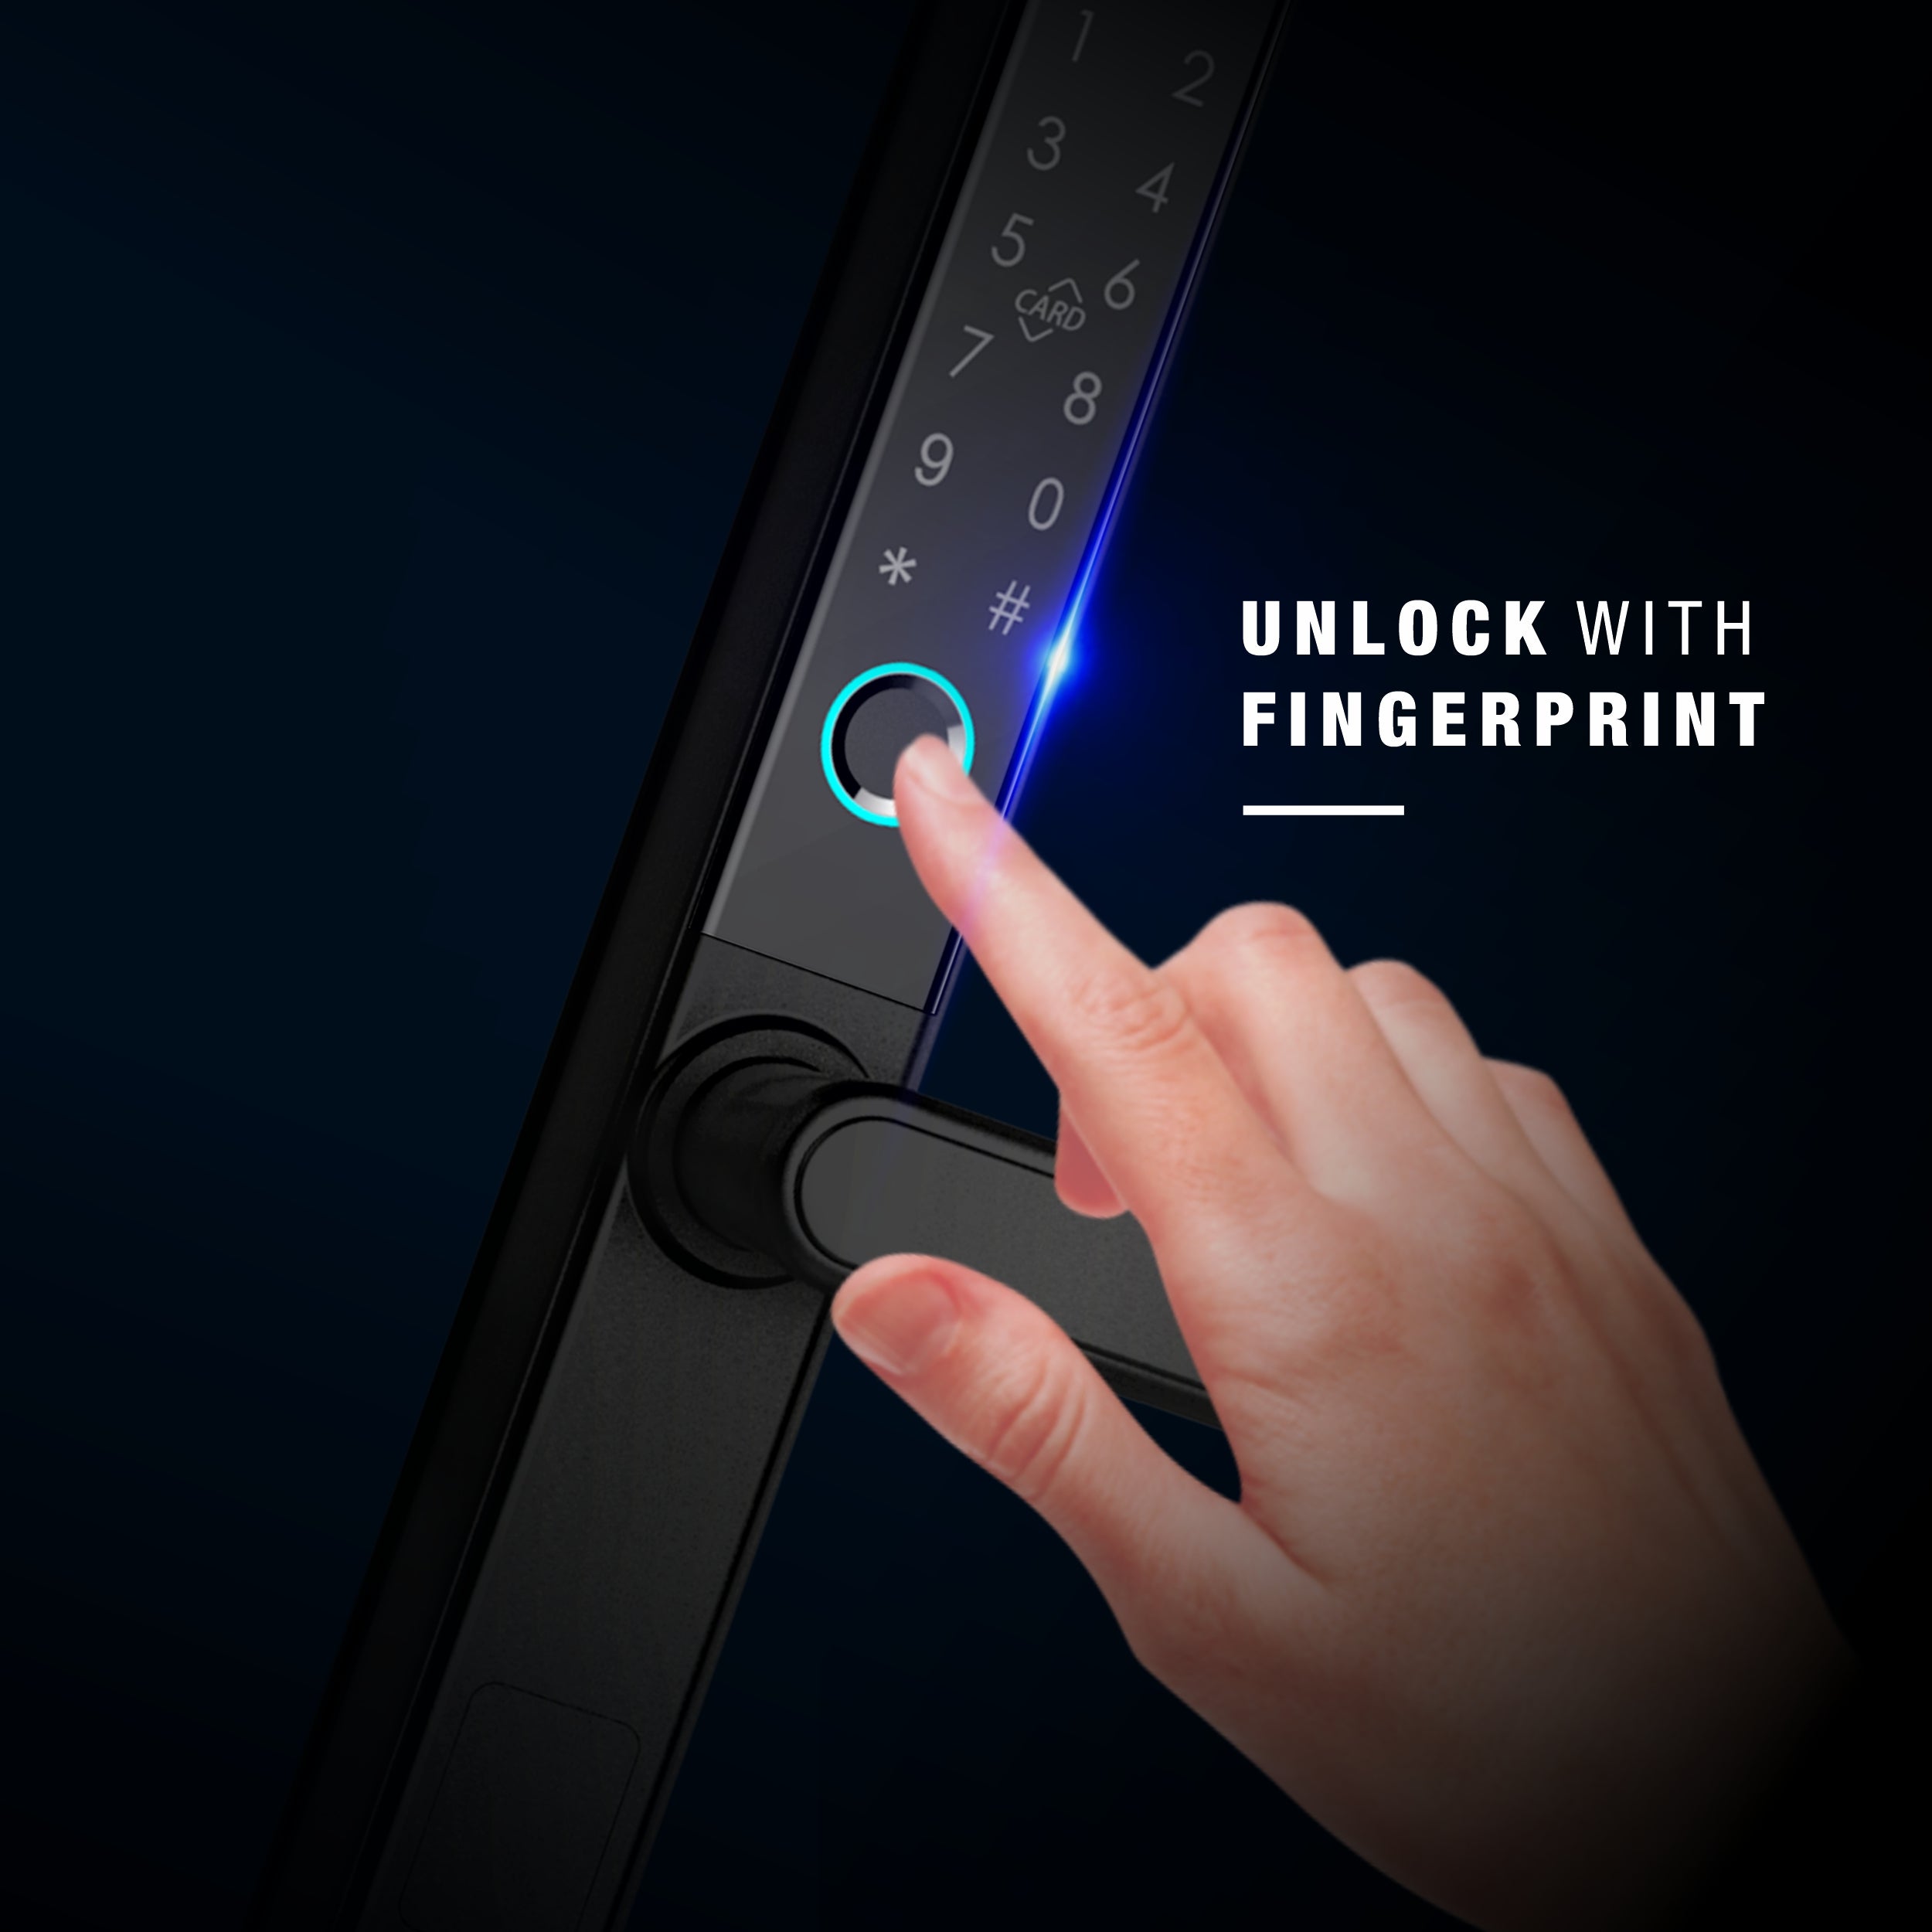 Ozone Narrow Style Wi-Fi Smart Lock with 5-way access for Swing Doors | Door Thickness: 35-80 mm